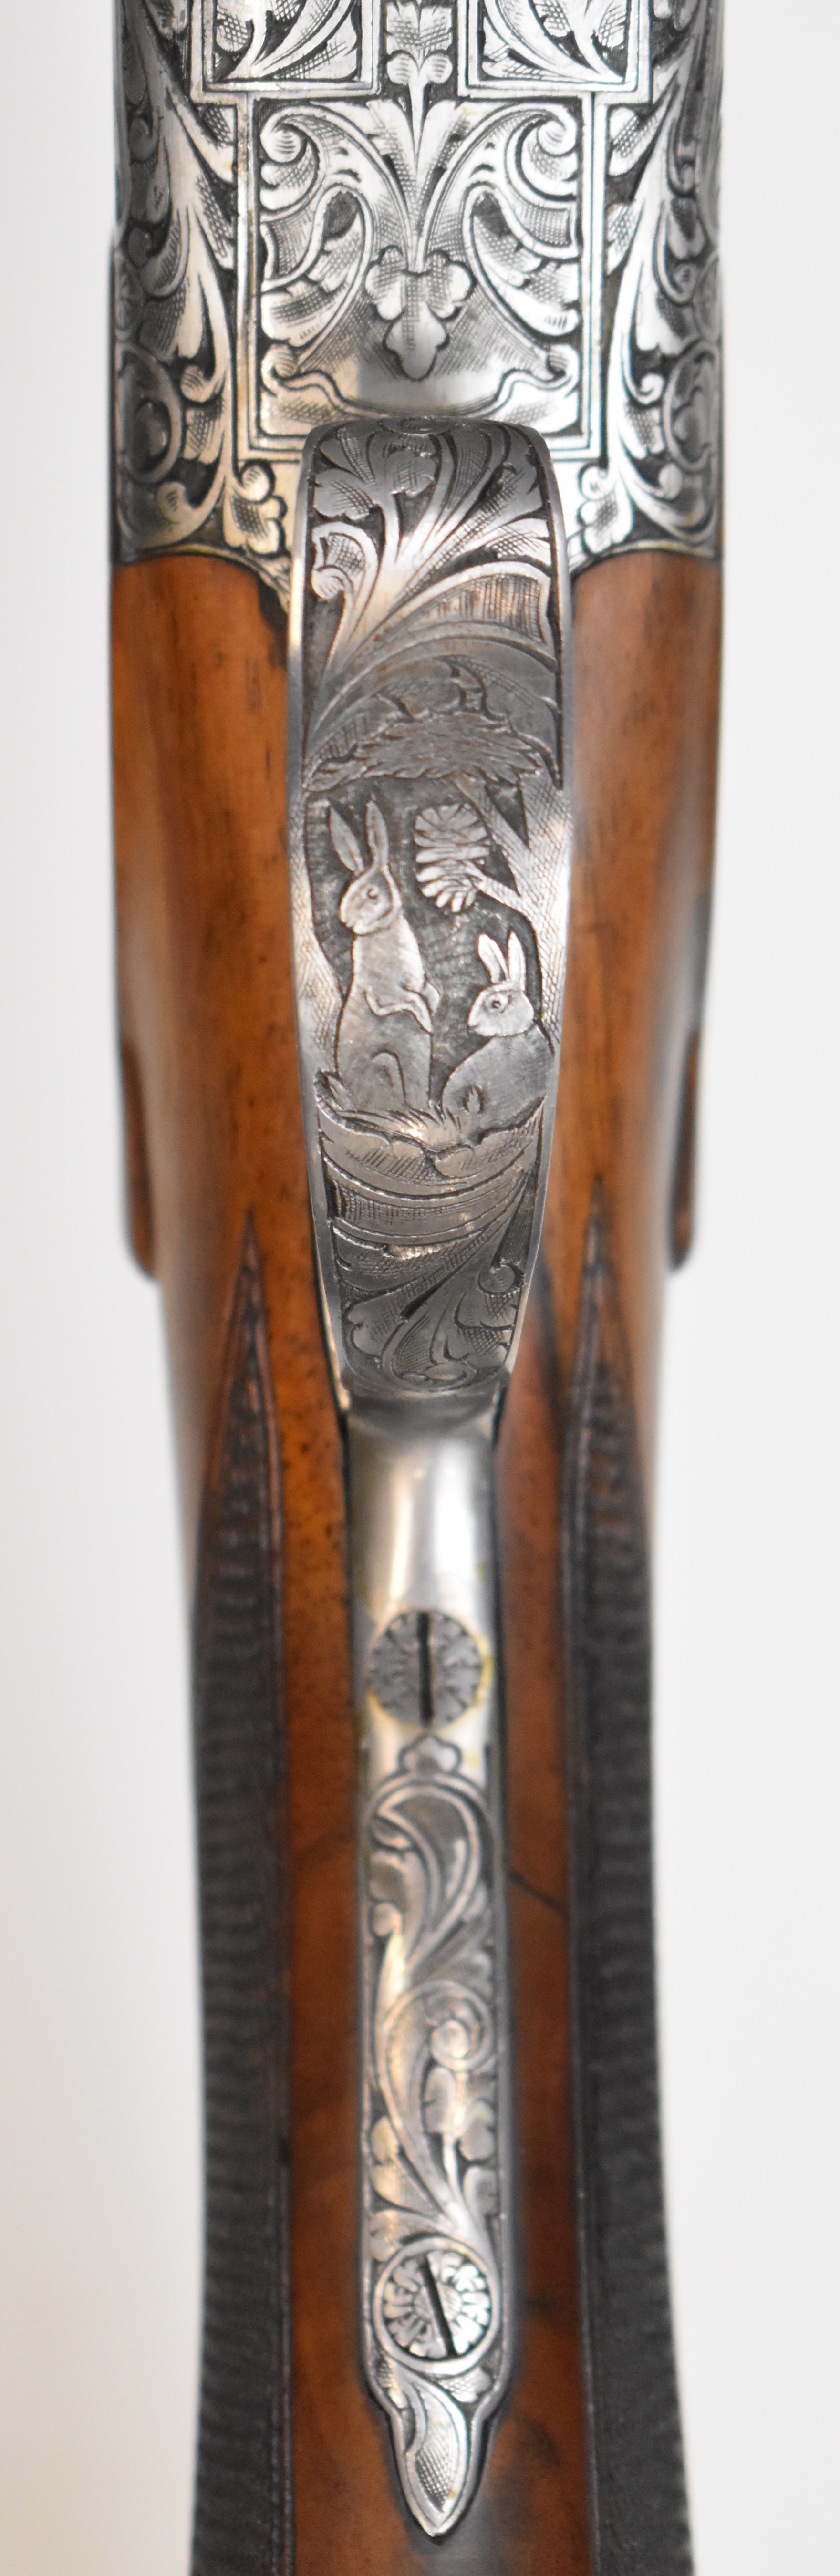 Browning B25 Diana 12 bore over and under ejector shotgun with Pierre Lallemand engraved scenes of - Image 29 of 30